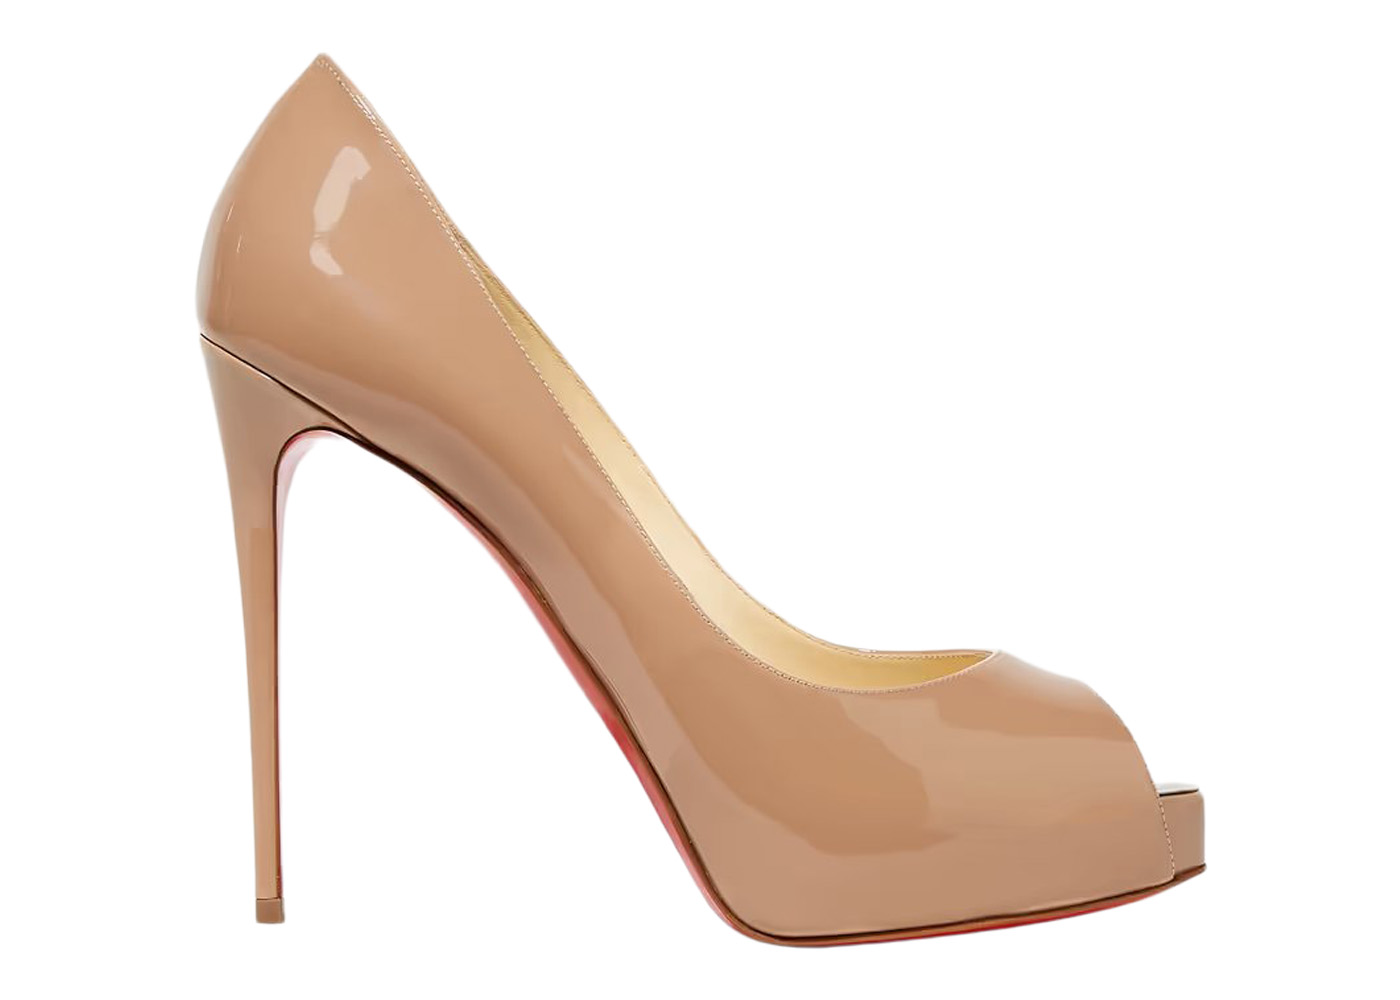 Christian Louboutin New Very Prive 120 Pump Nude Patent Leather